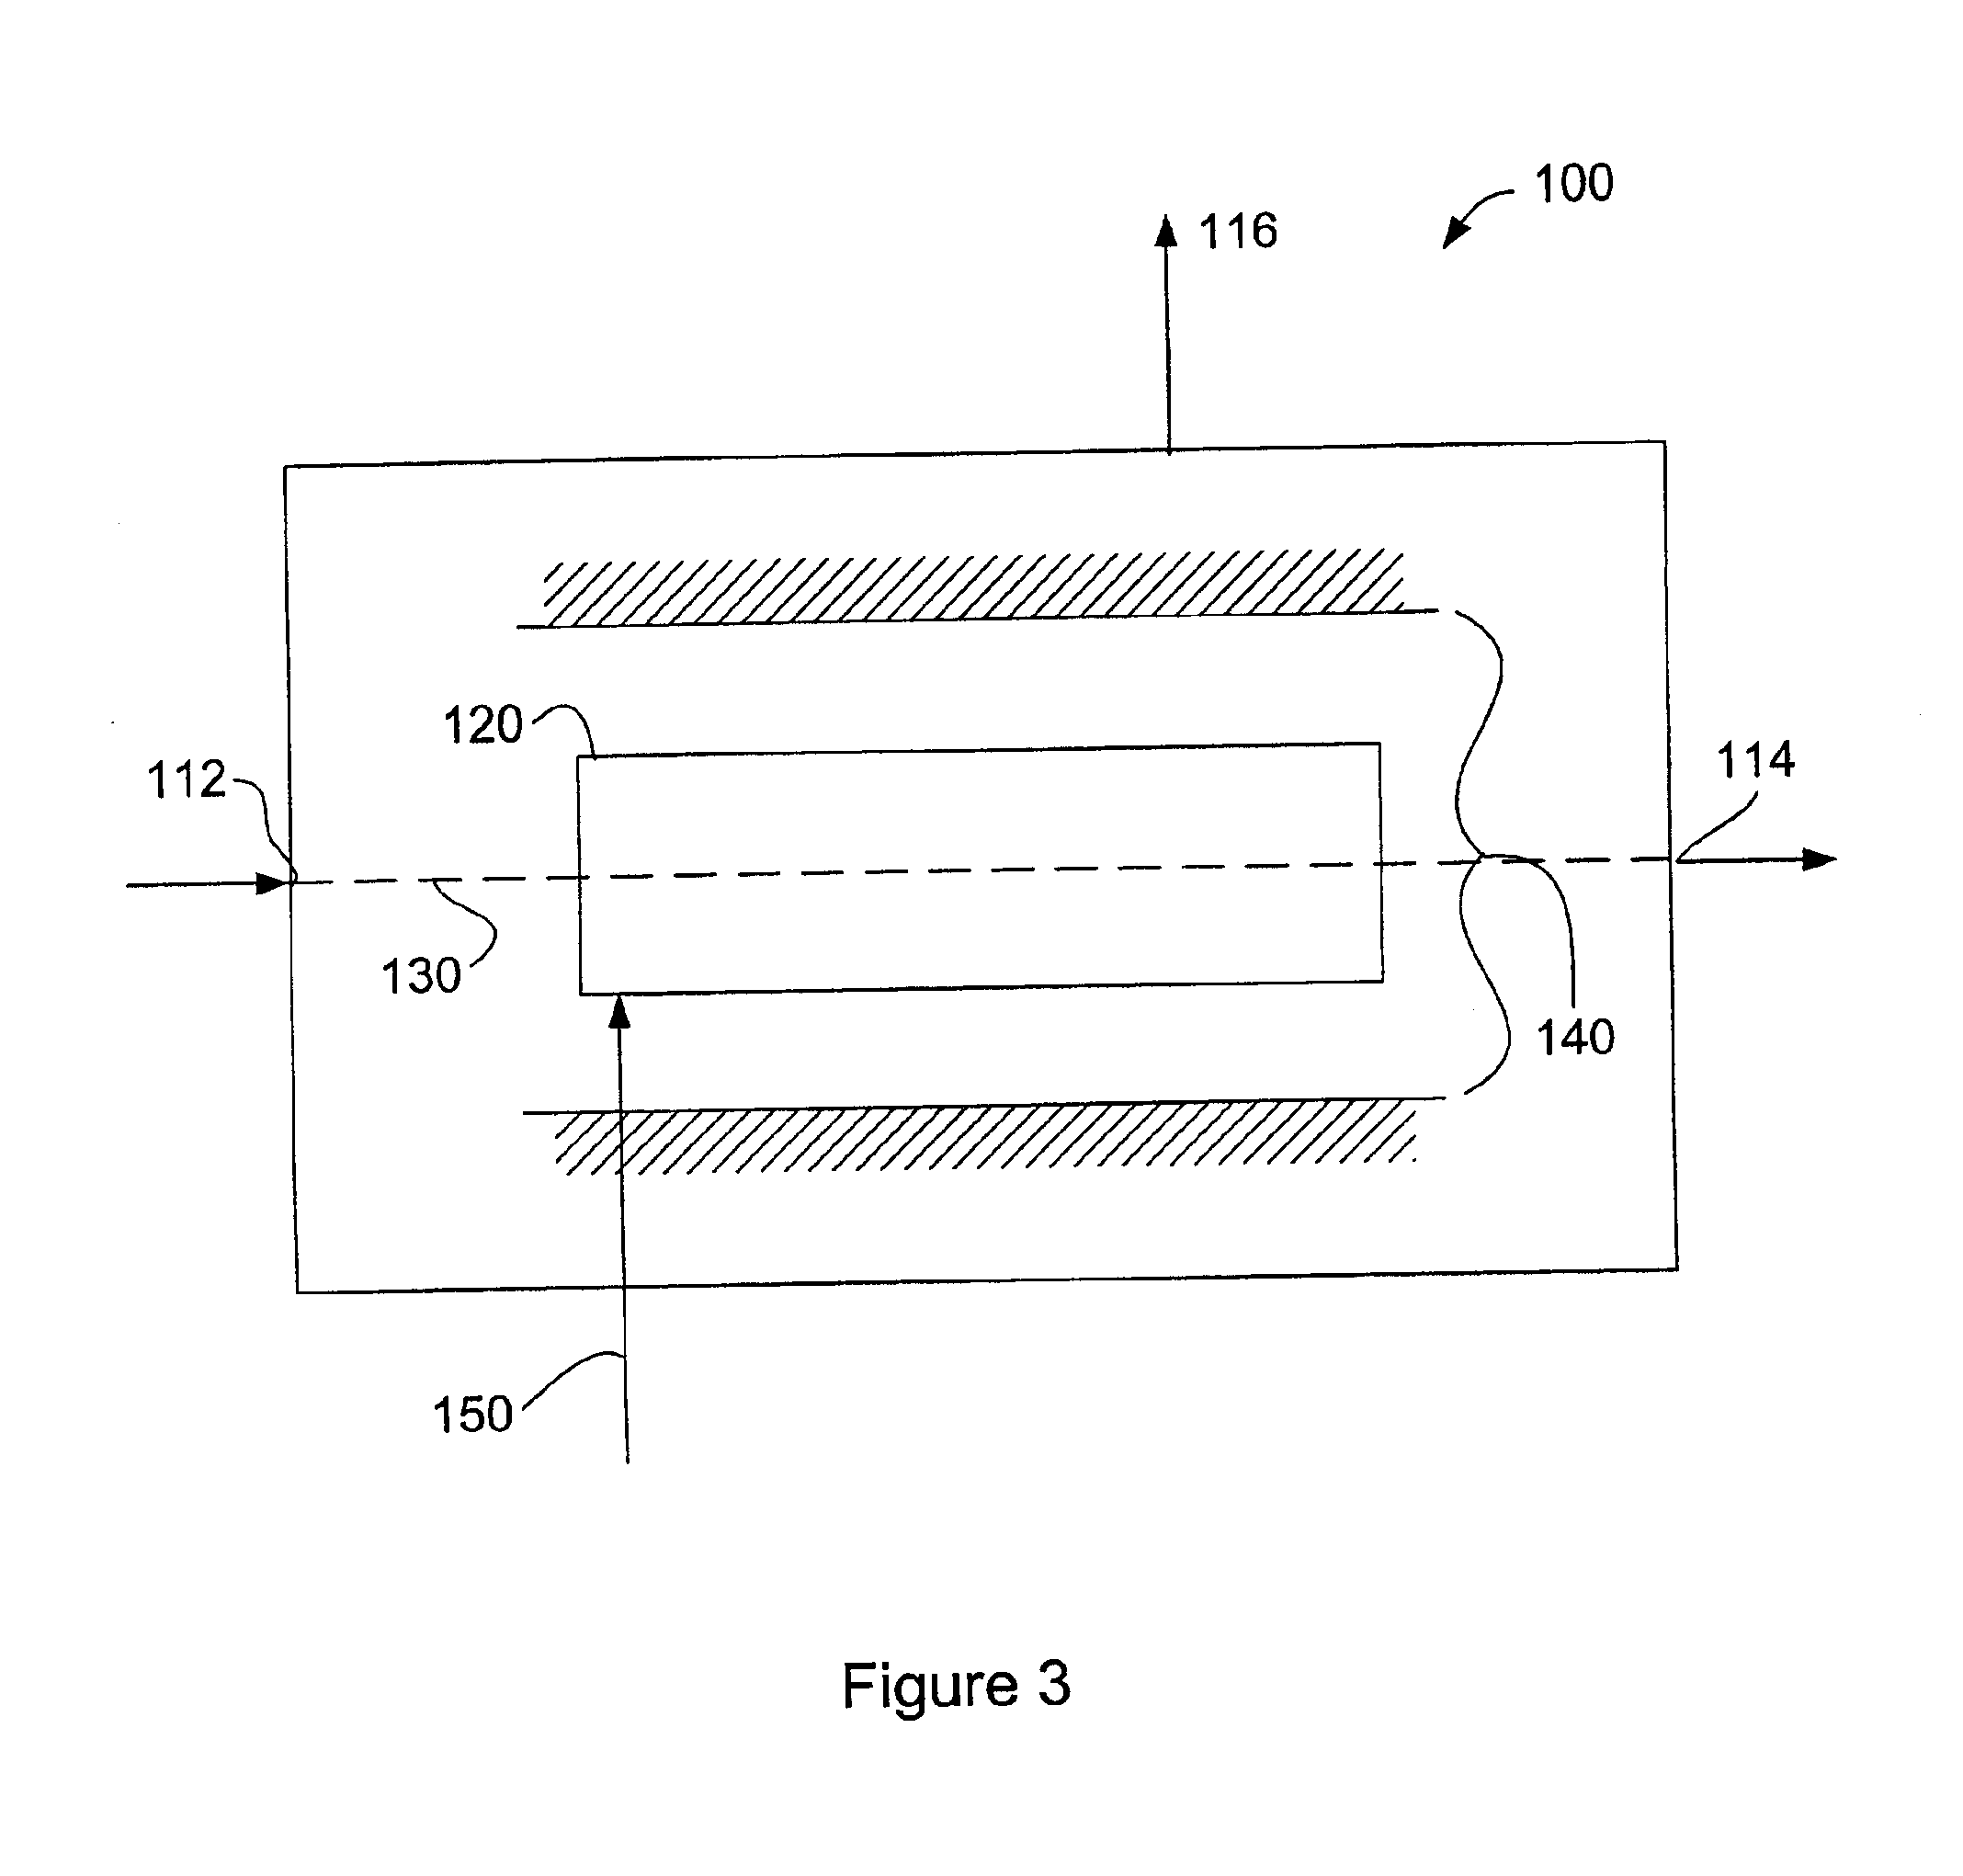 Optical amplifier with damped relaxation oscillation